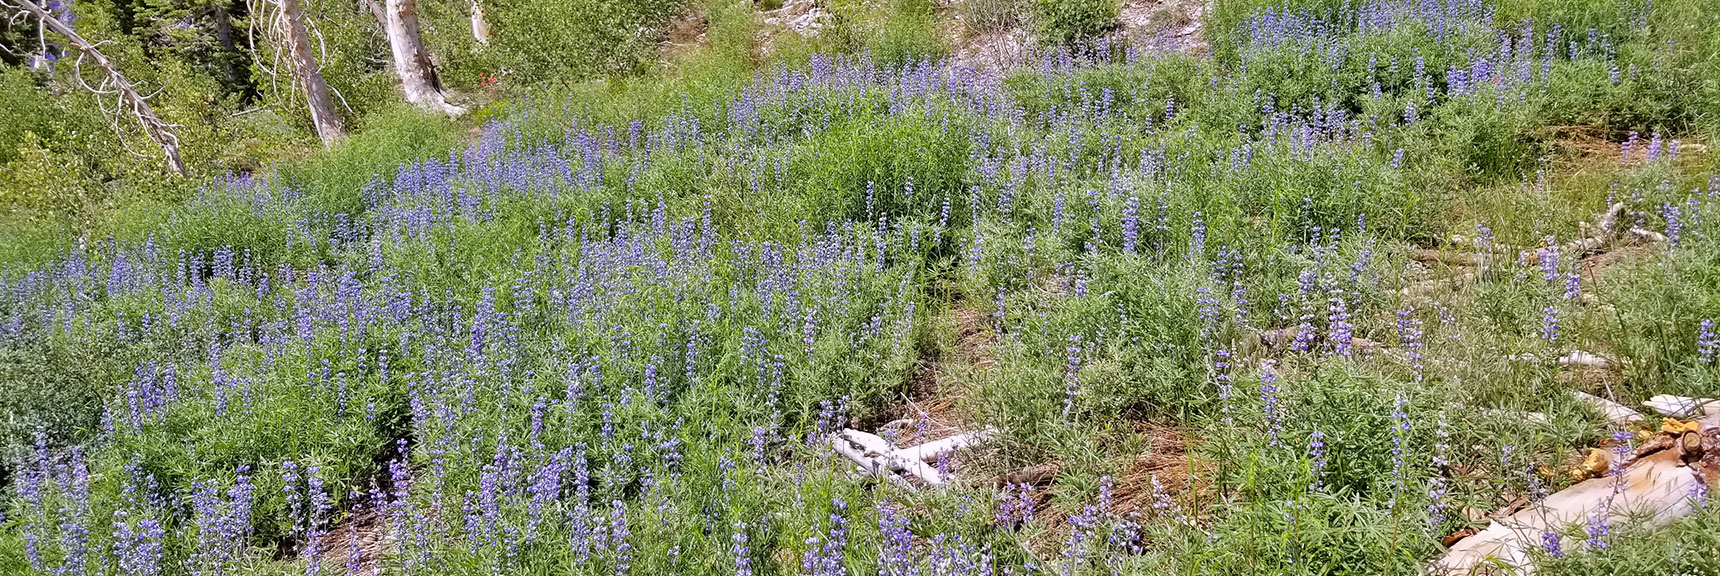 Field of Wild Lupine Flowers in the Griffith/Harris Saddle | Six Peak Circuit Adventure in the Spring Mountains, Nevada